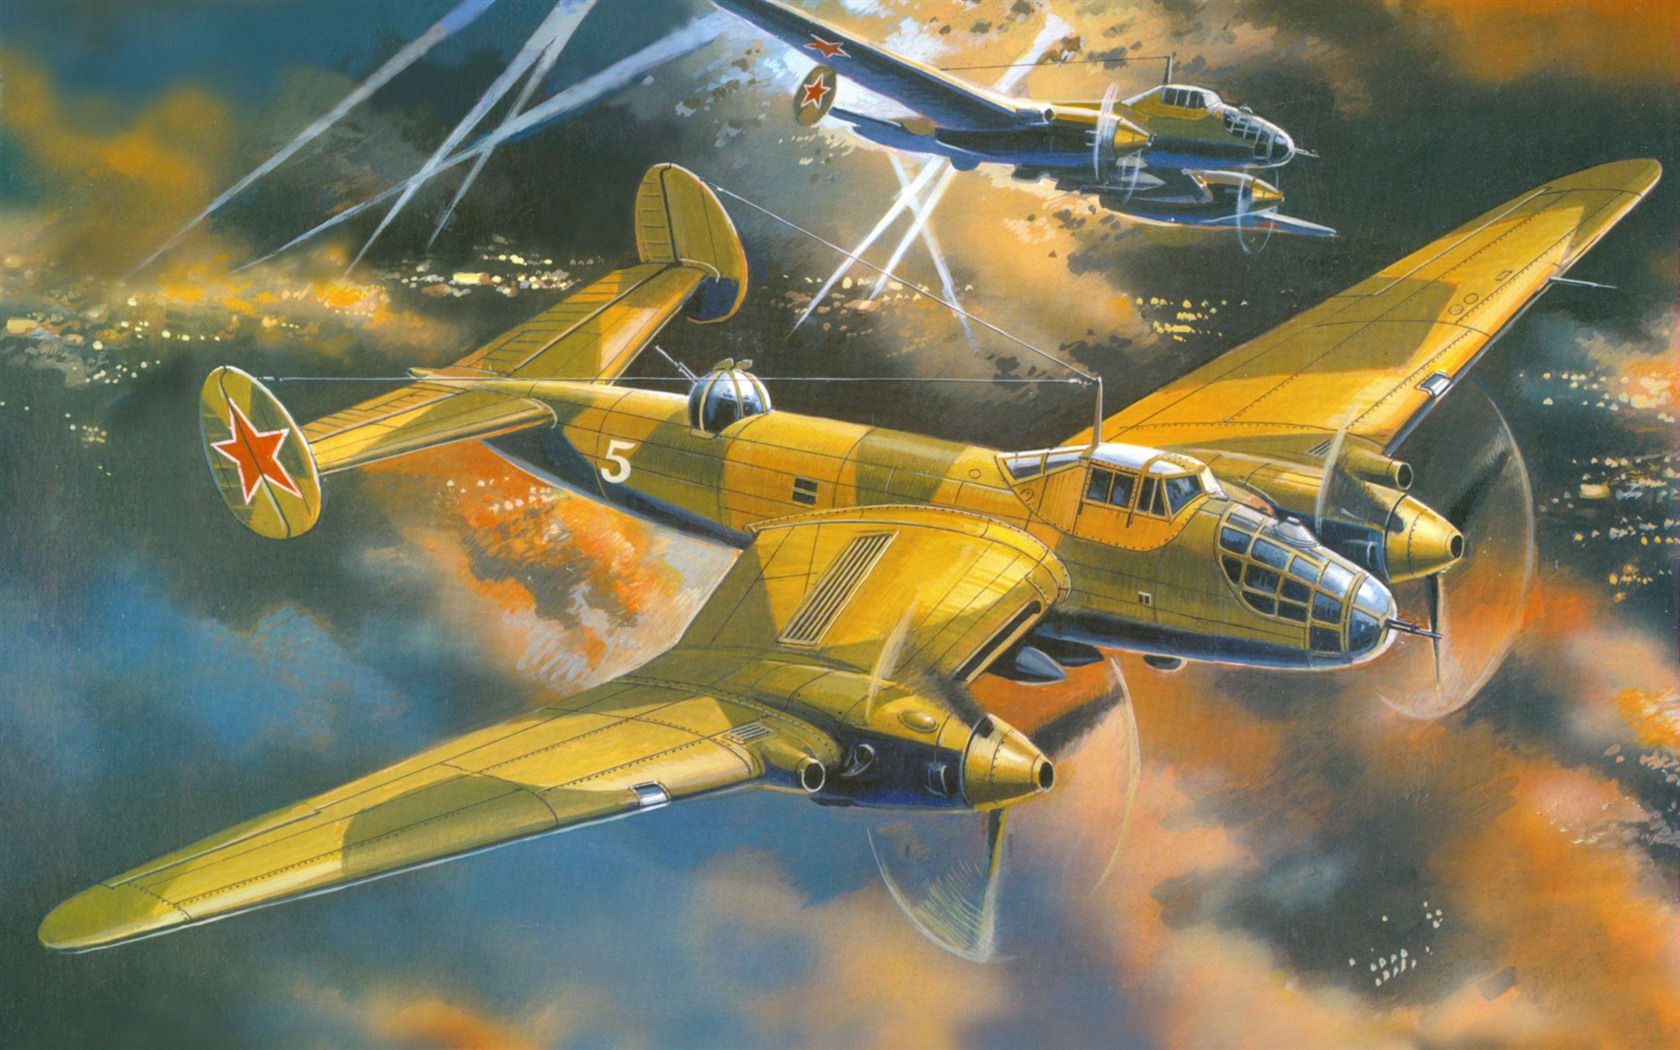 Military aircraft flight exquisite painting wallpapers #18 - 1680x1050